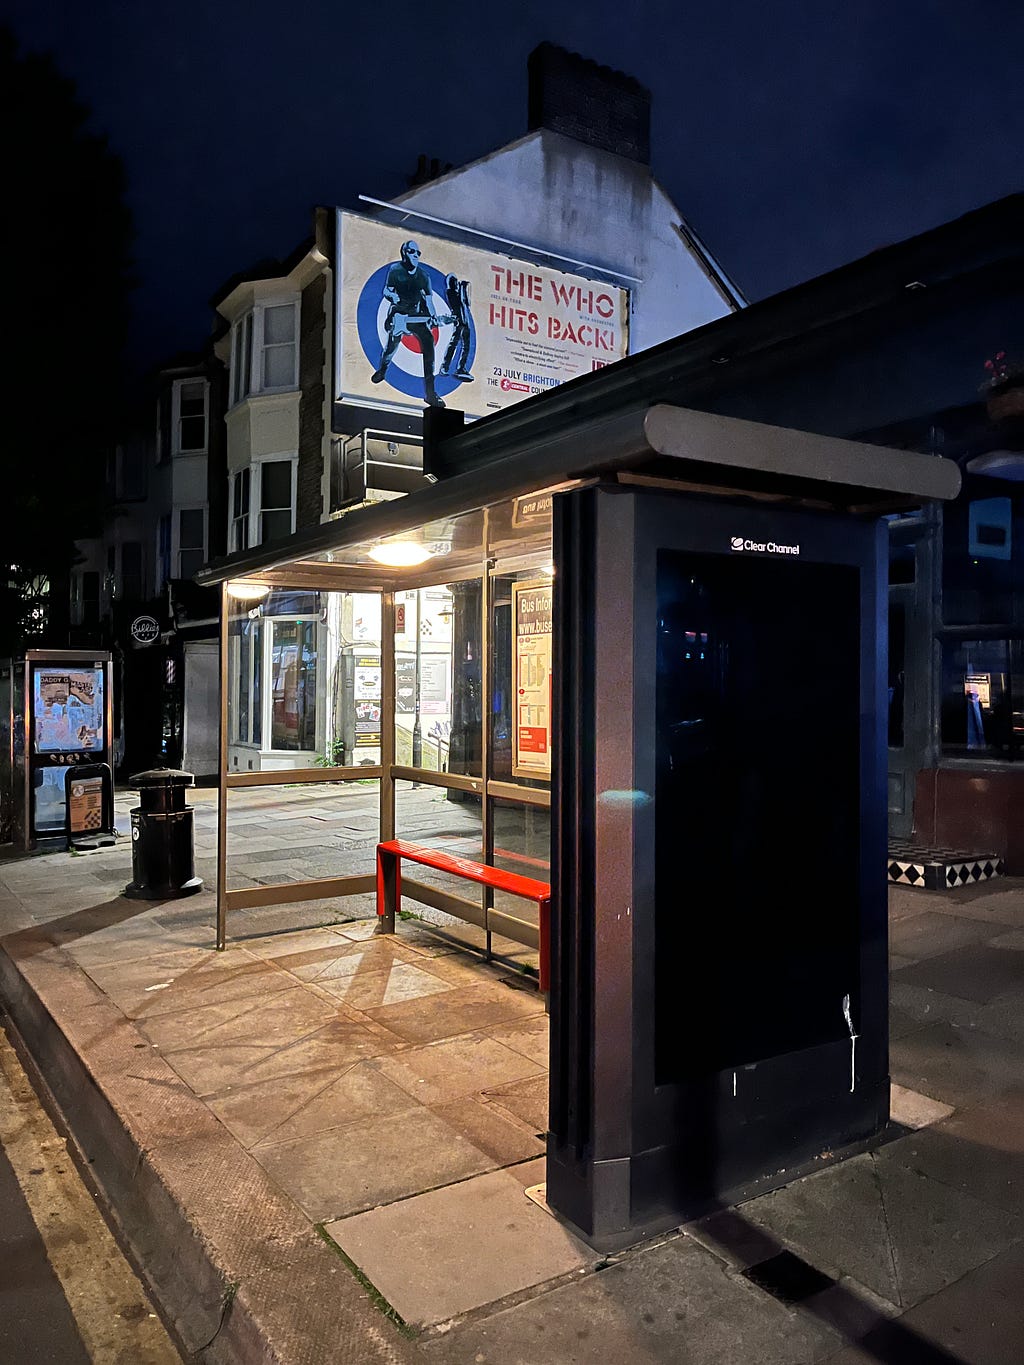 Photograph of a lit-up Hove bus stop at night, with a poster for a concert by The Who on the wall behind it.